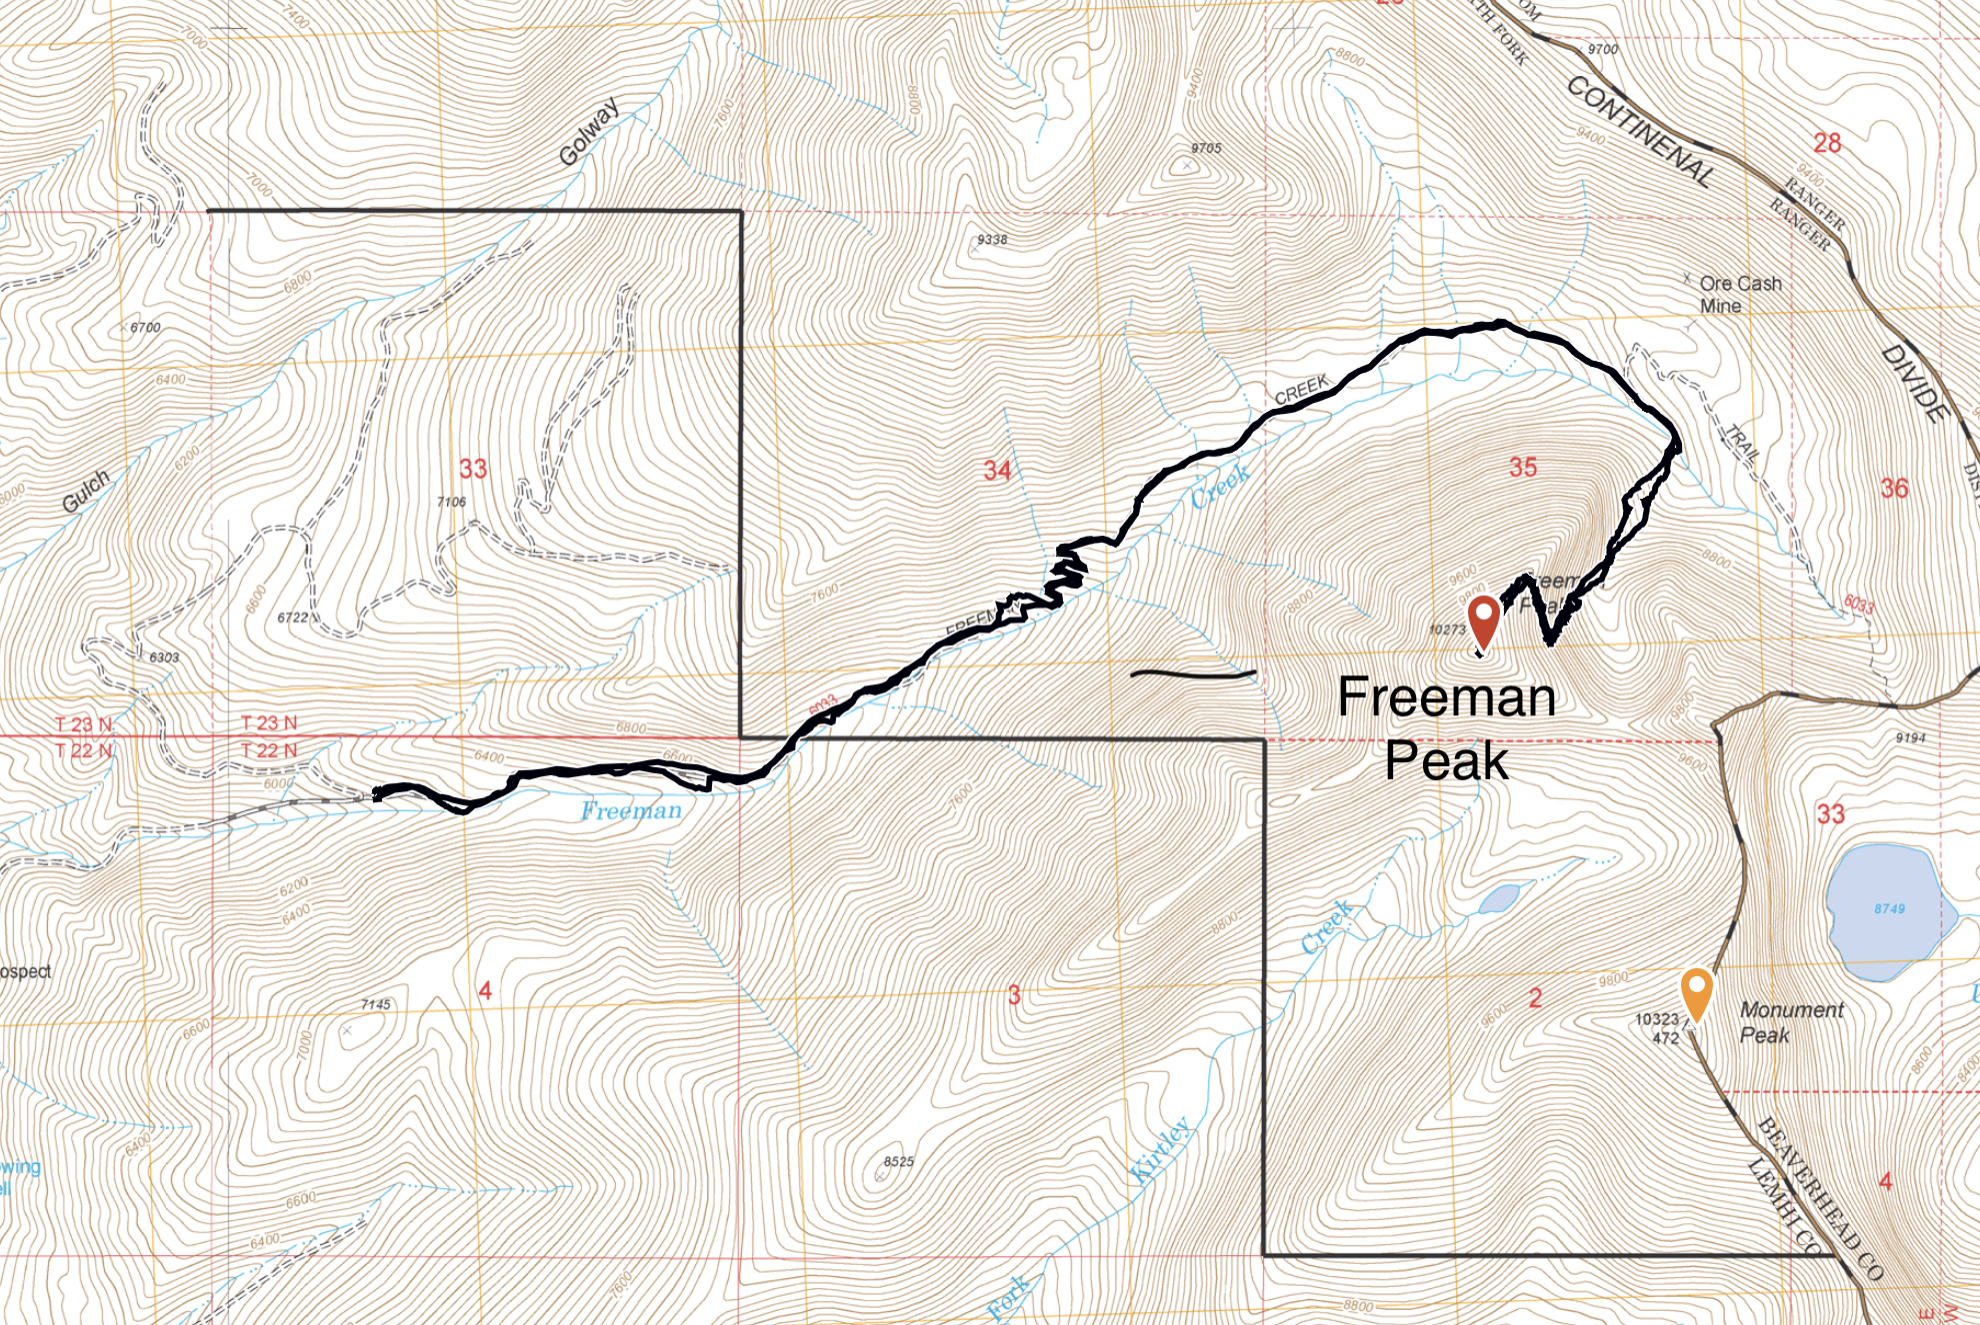 Jeff Hunteman’s GPS track. Jeff recorded a round trip distance of 8.3 miles with 4,126 feet of elevation gain.